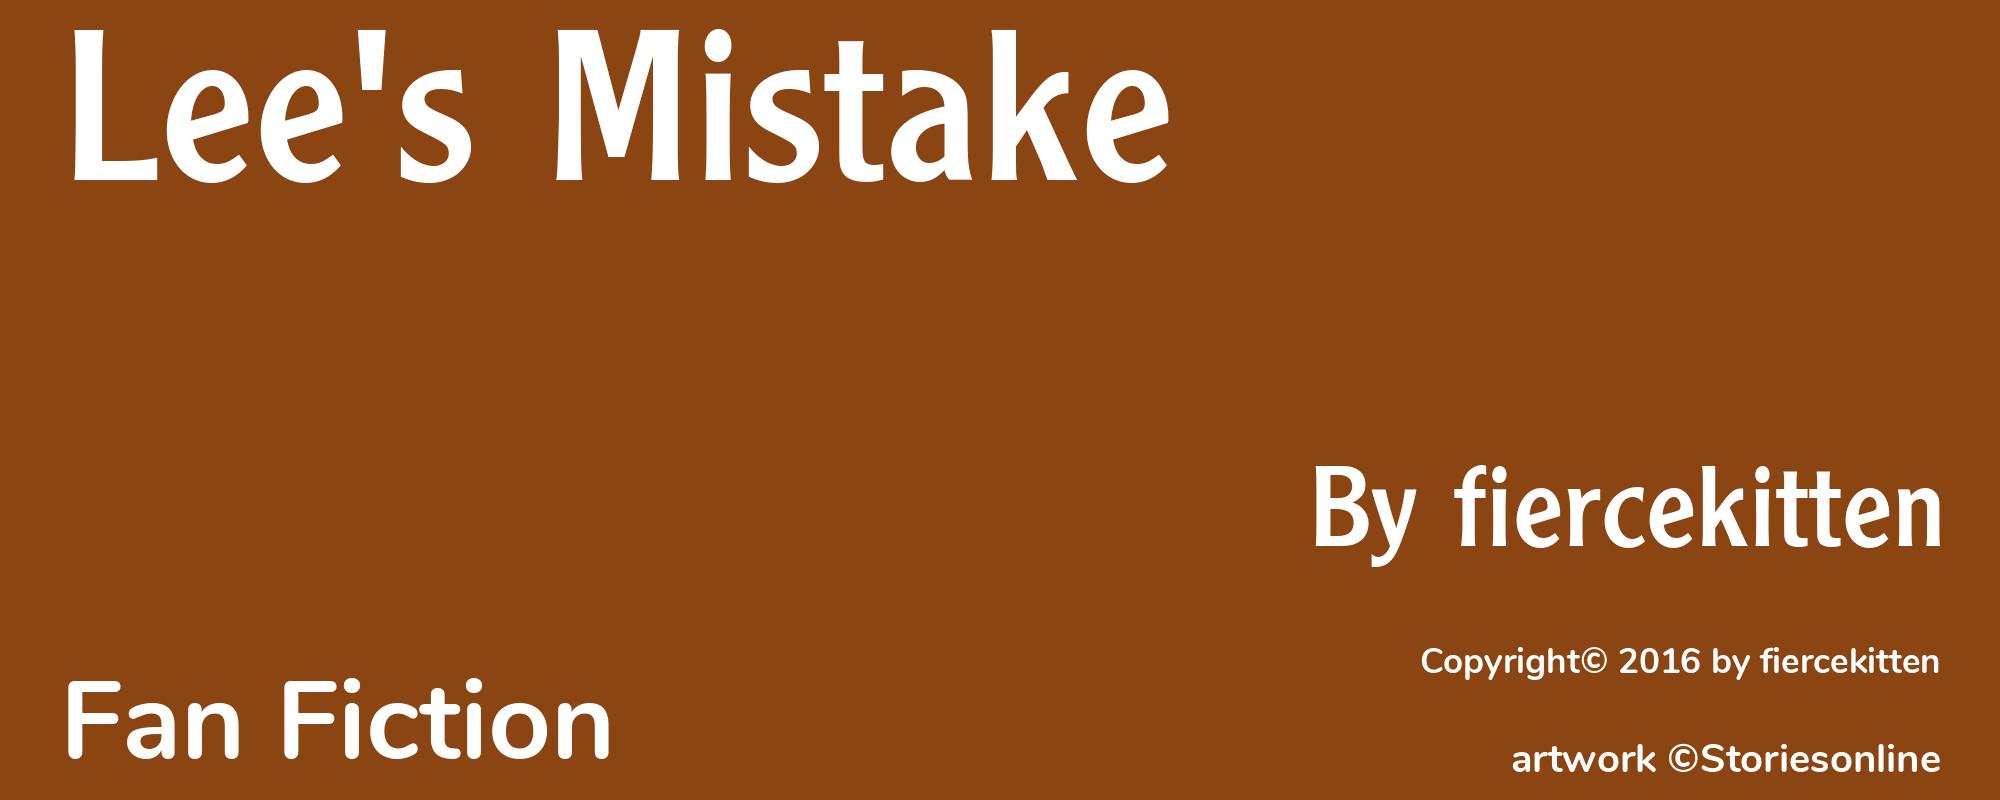 Lee's Mistake - Cover